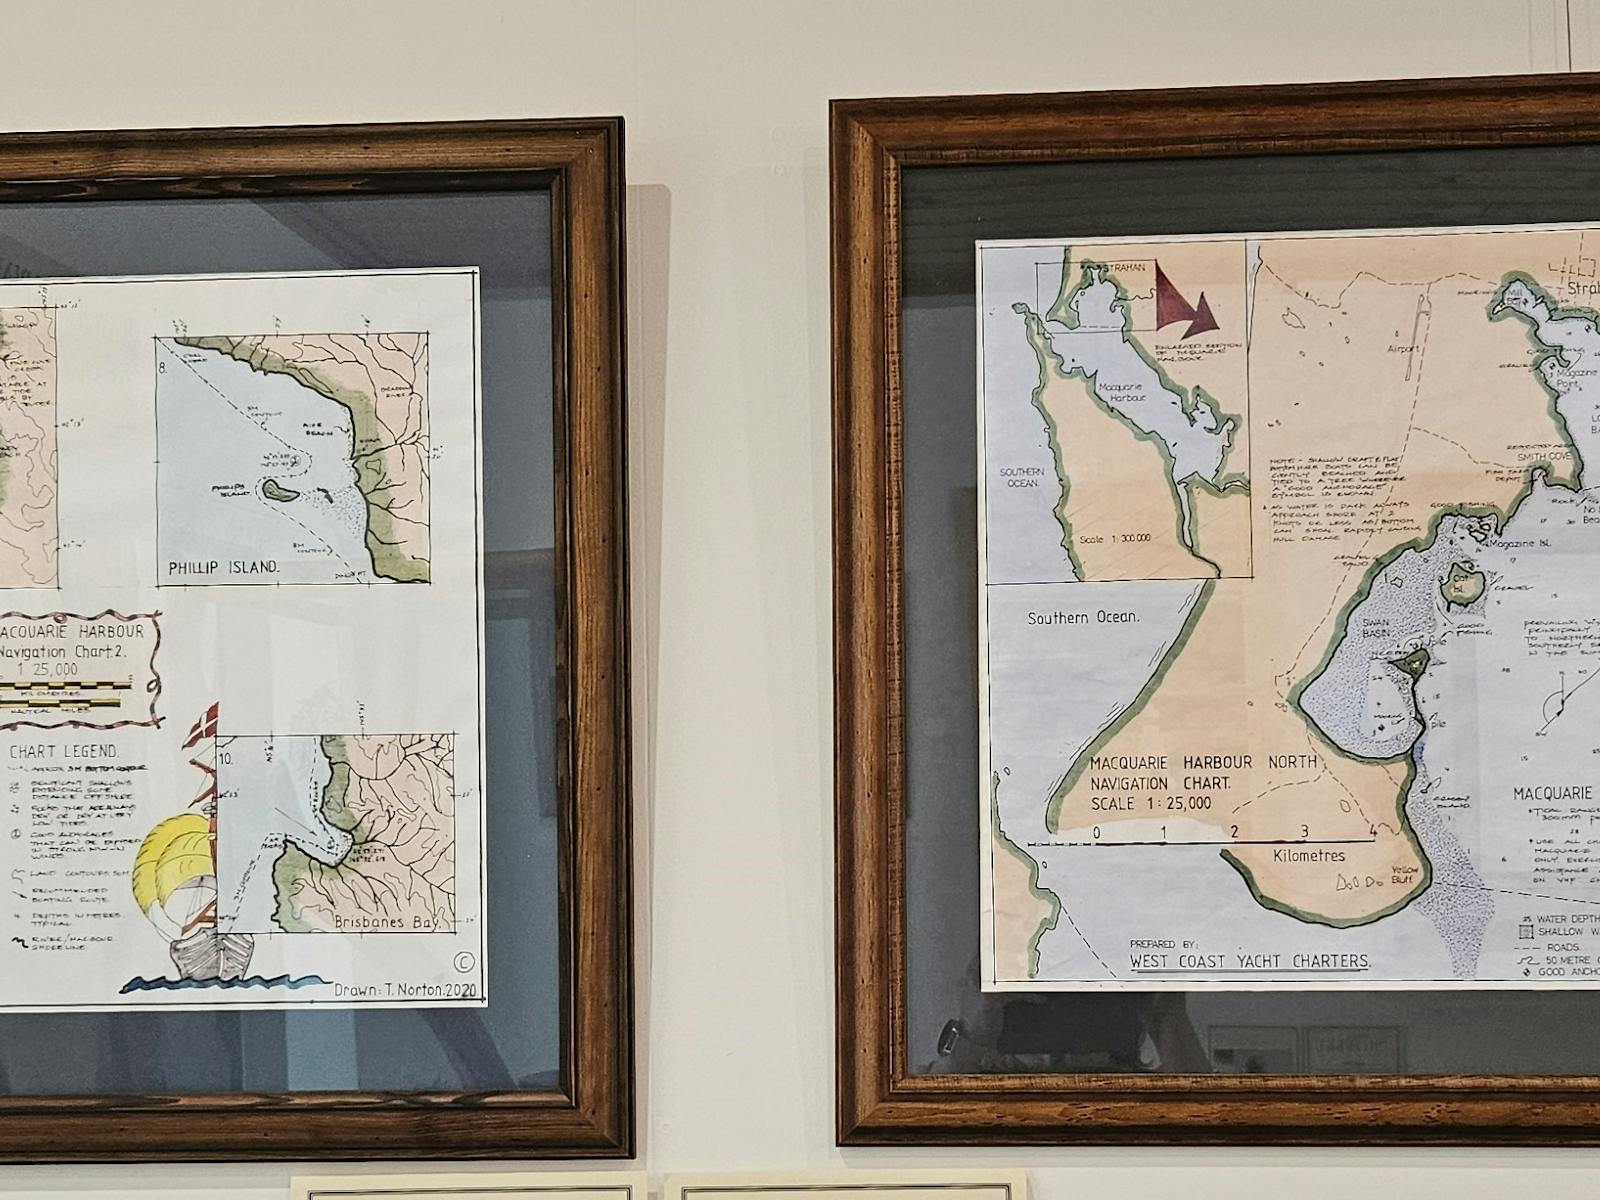 Two framed maps of Macquarie Harbour